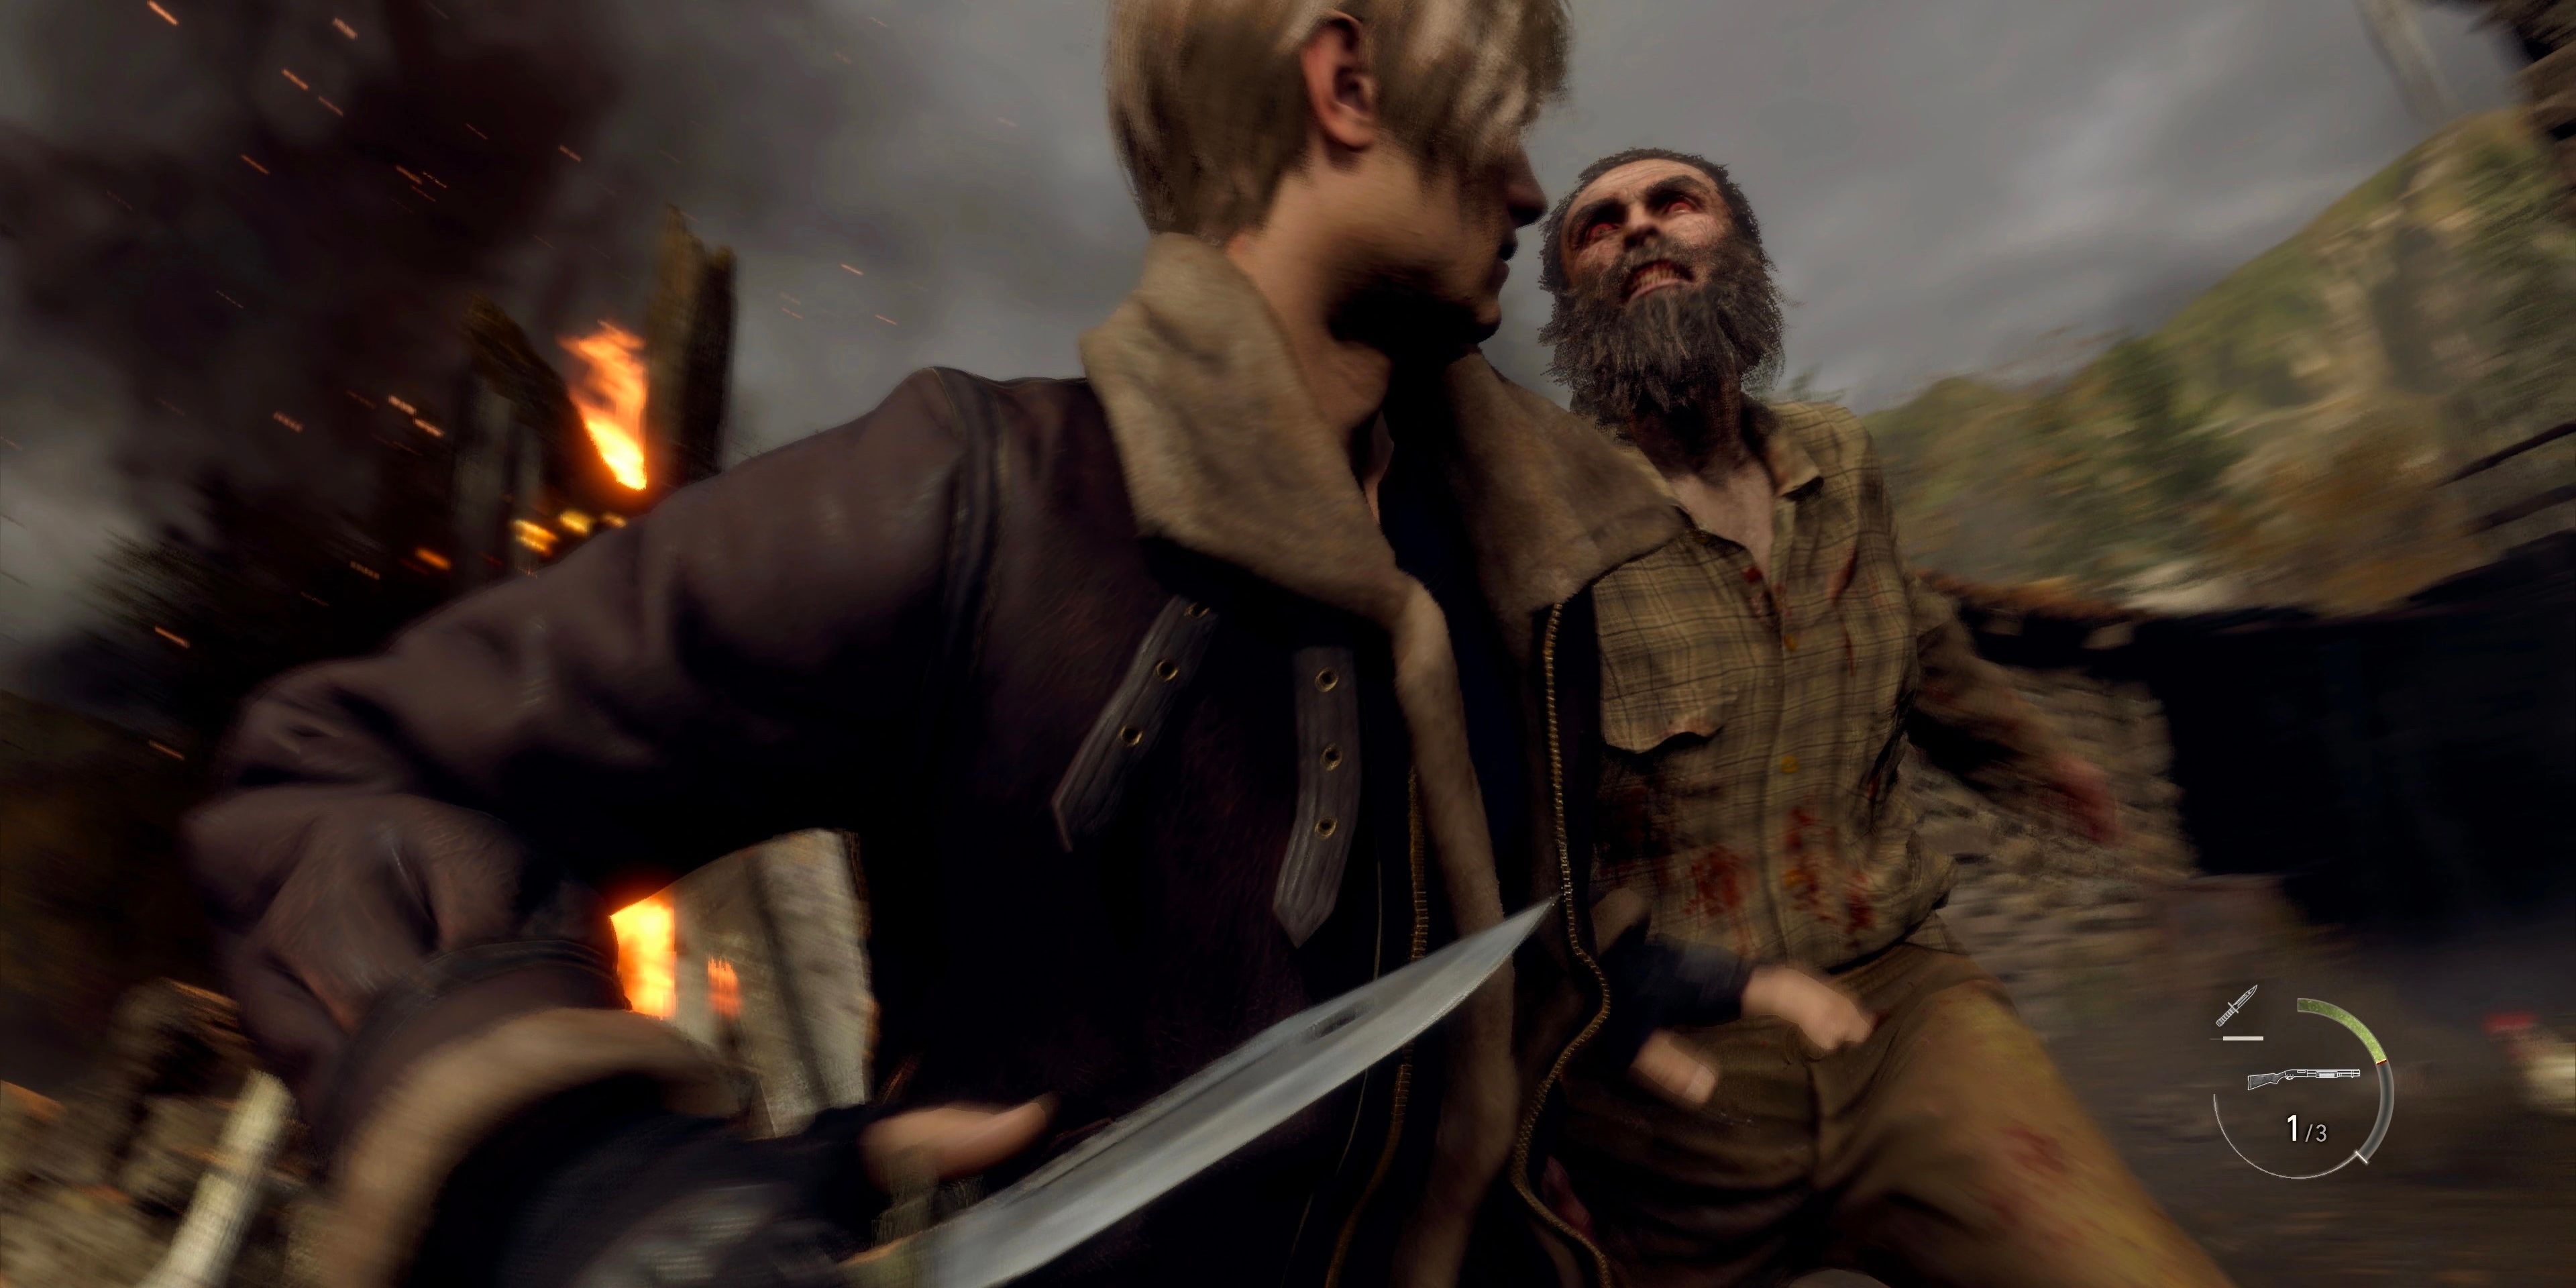 Resident Evil 4 Remake Includes Enemies Scrapped From the Original